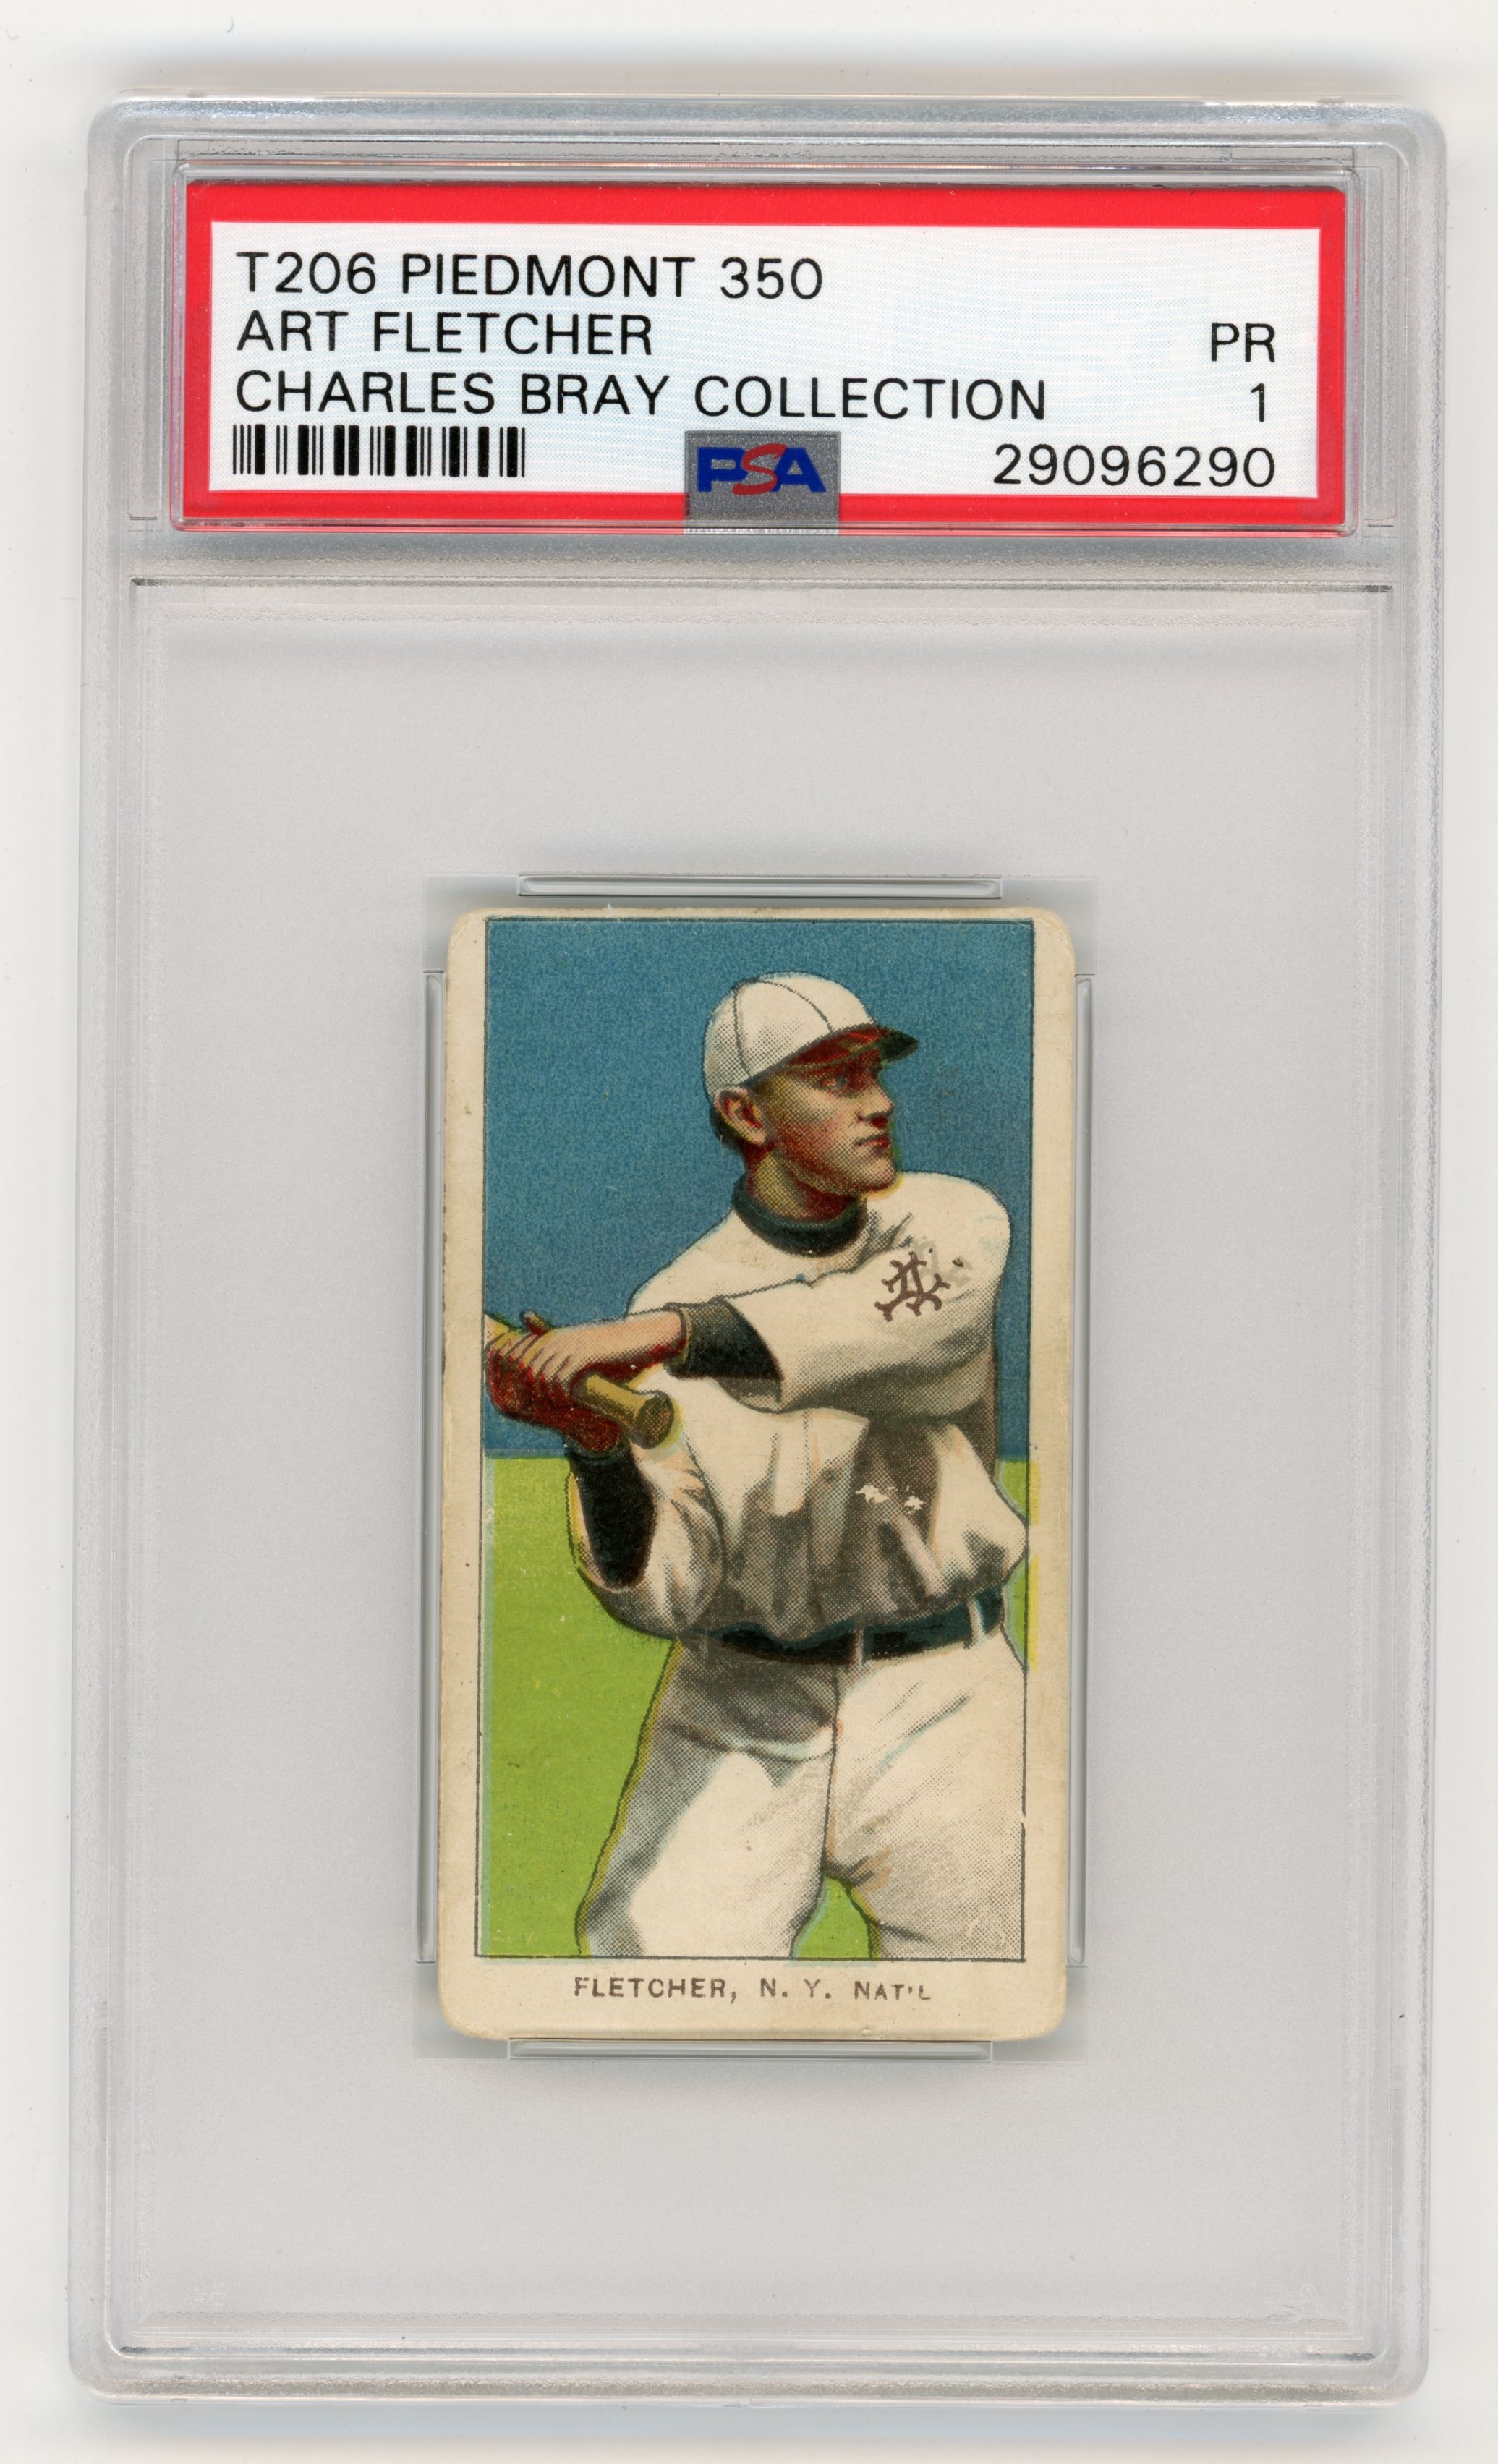 T206 Piedmont 350 Art Fletcher PSA PR 1 From the Charles Bray Collection.